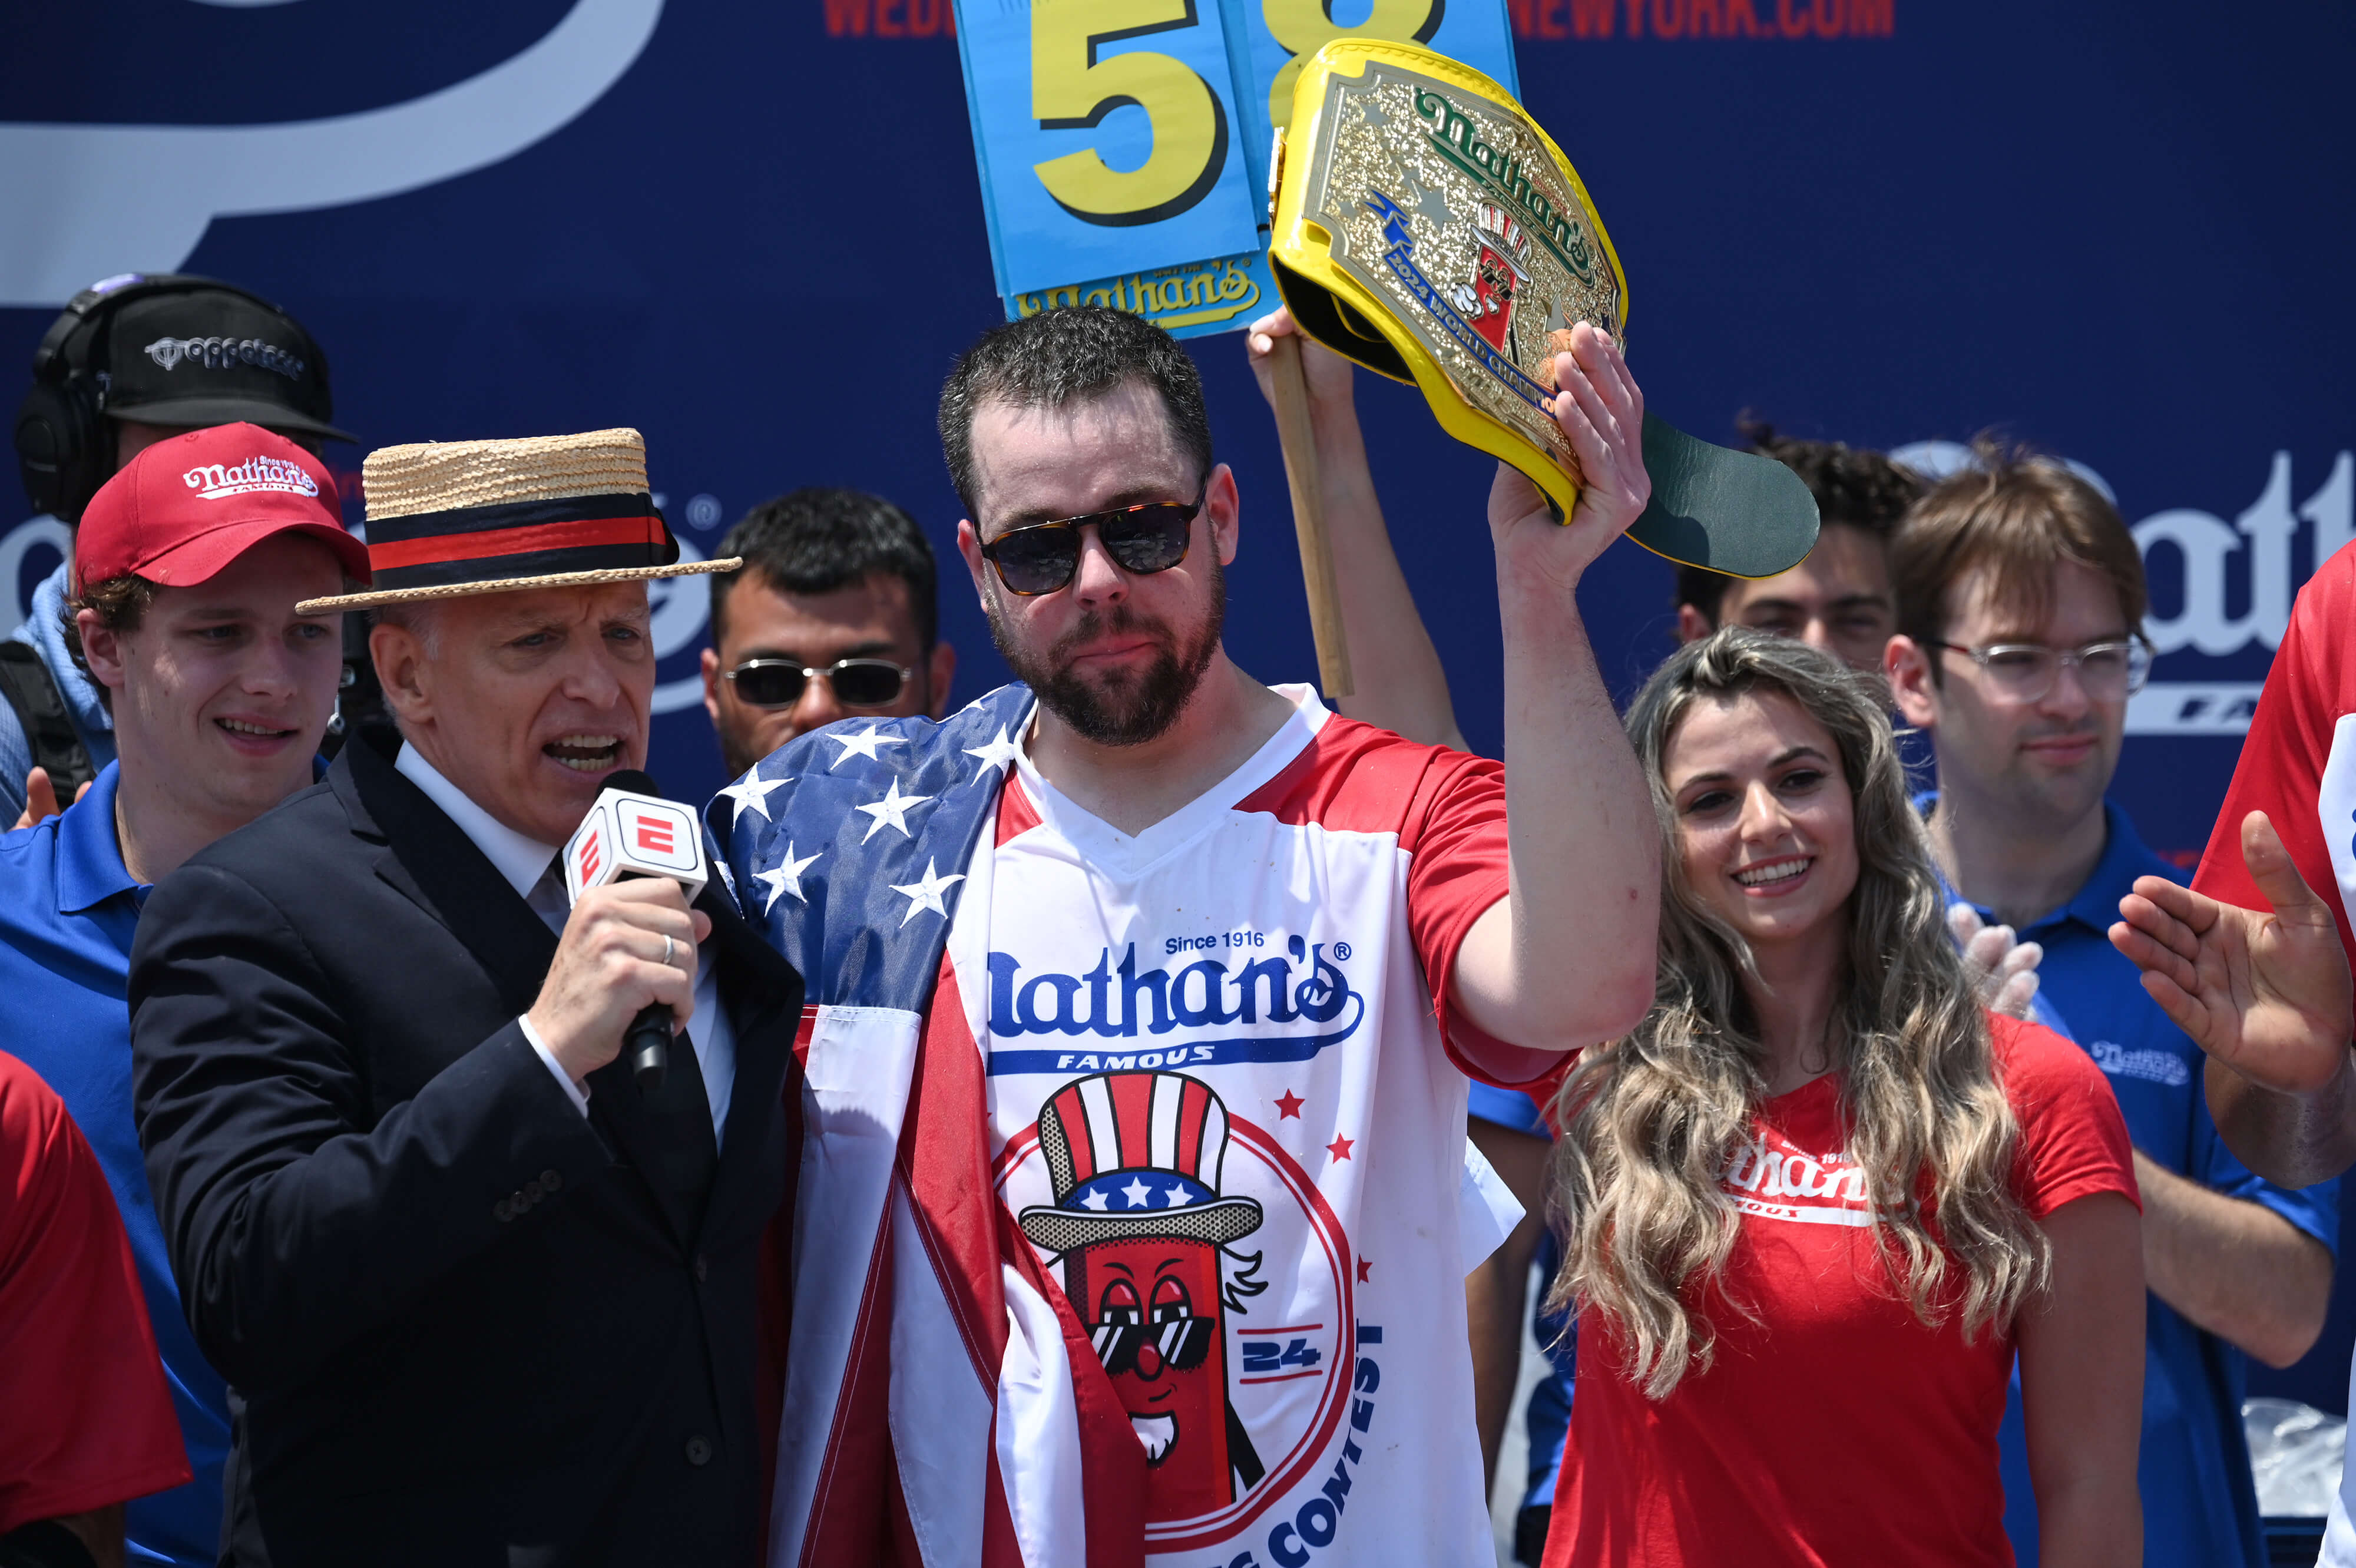 How To Bet - BetMGM Takes Less Action, Caesars Reports ‘Favorable Outcome’ from Joey Chestnut-less Hot Dog Eating Contest